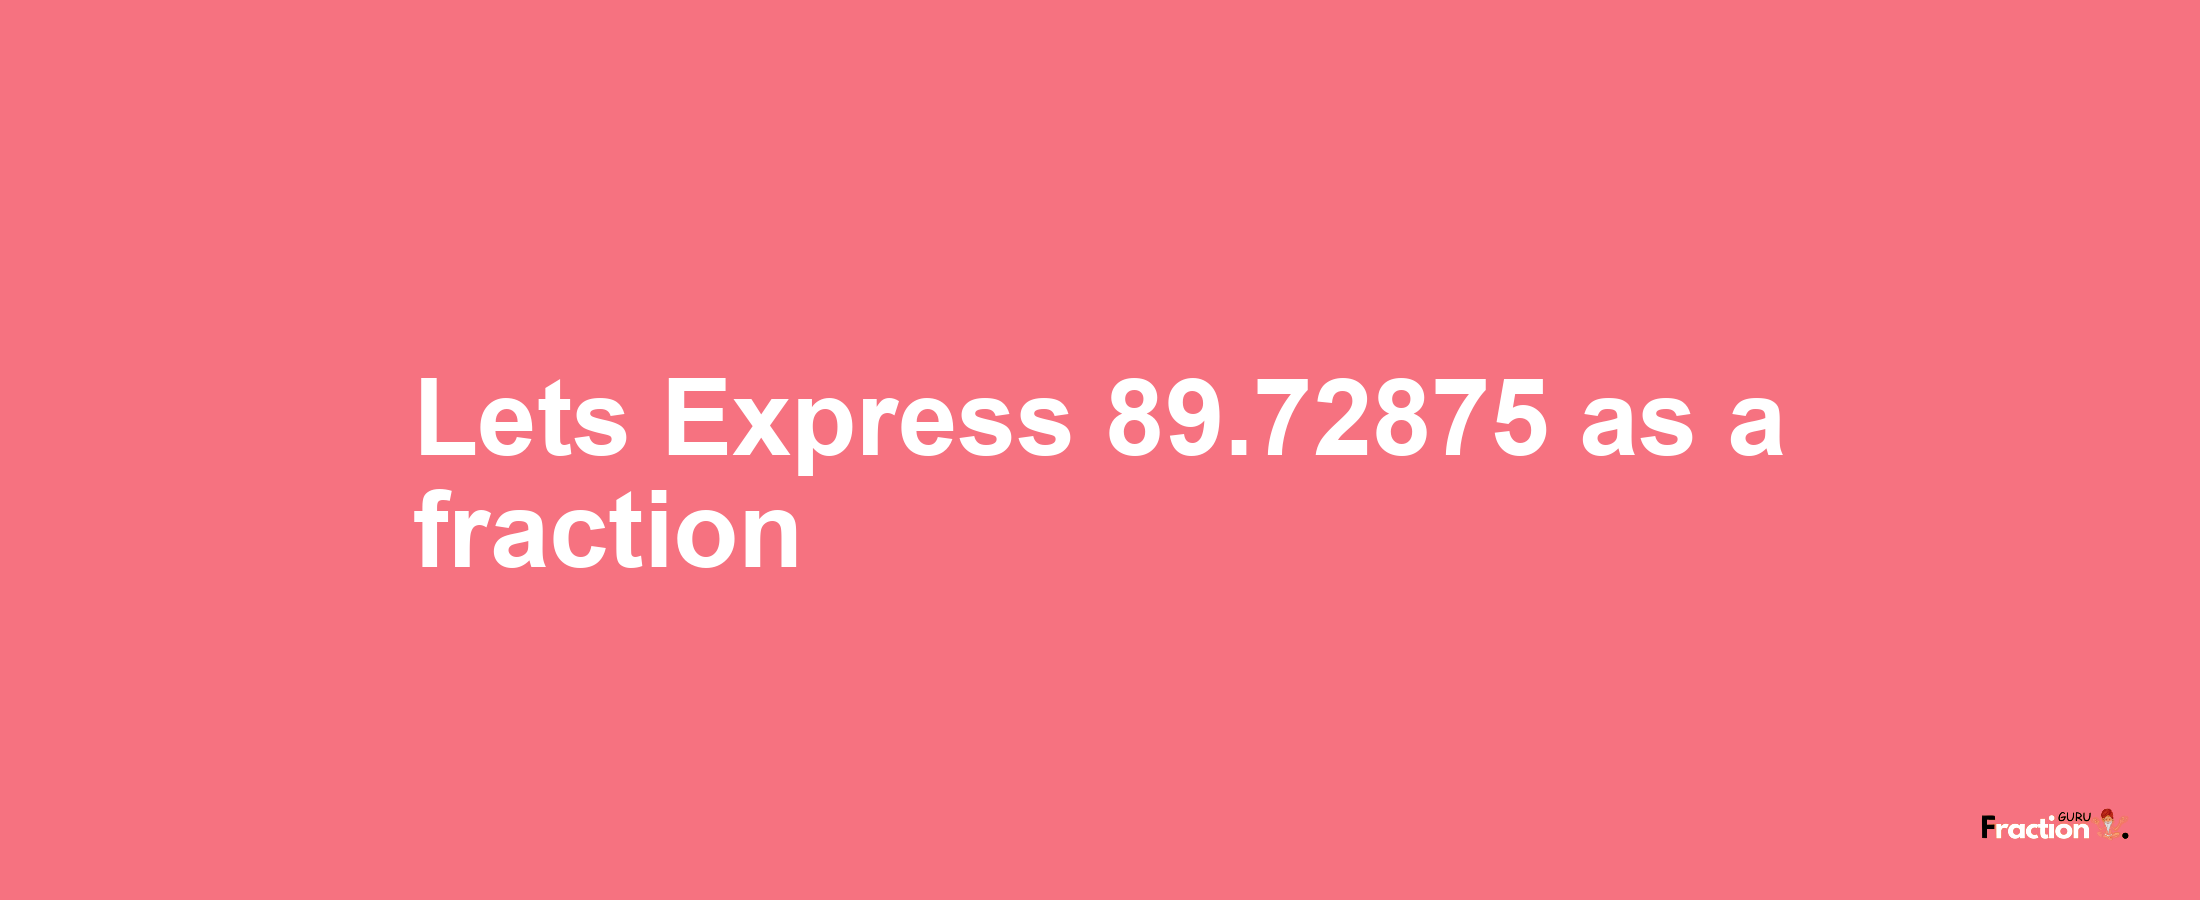 Lets Express 89.72875 as afraction